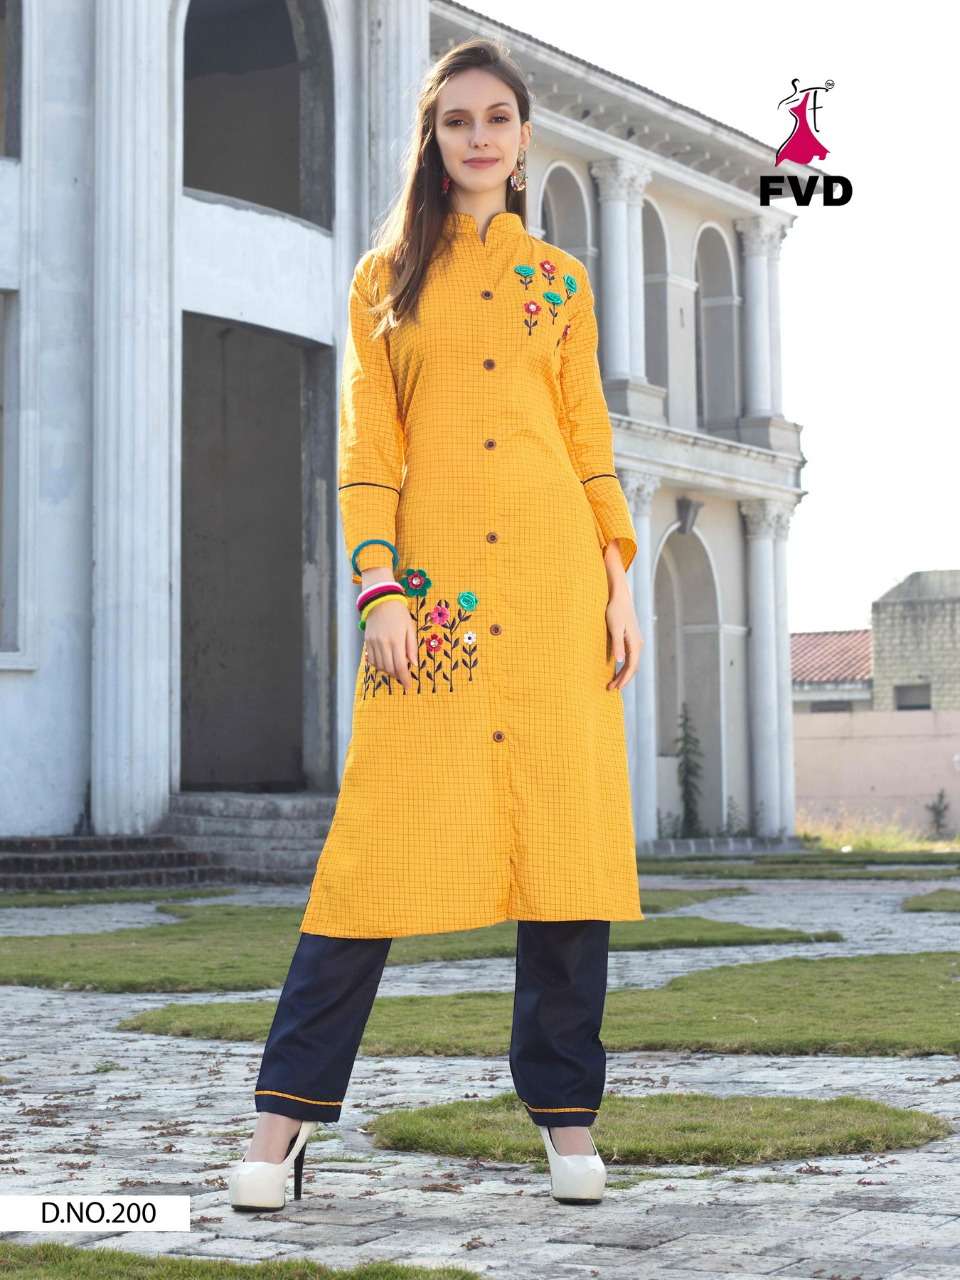 CITY GIRL VOL-3 BY FVD 197 TO 203 SERIES BEAUTIFUL COLORFUL STYLISH FANCY PARTY WEAR & ETHNIC WEAR & READY TO WEAR KHADI COTTON KURTIS WITH BOTTOM AT WHOLESALE PRICE